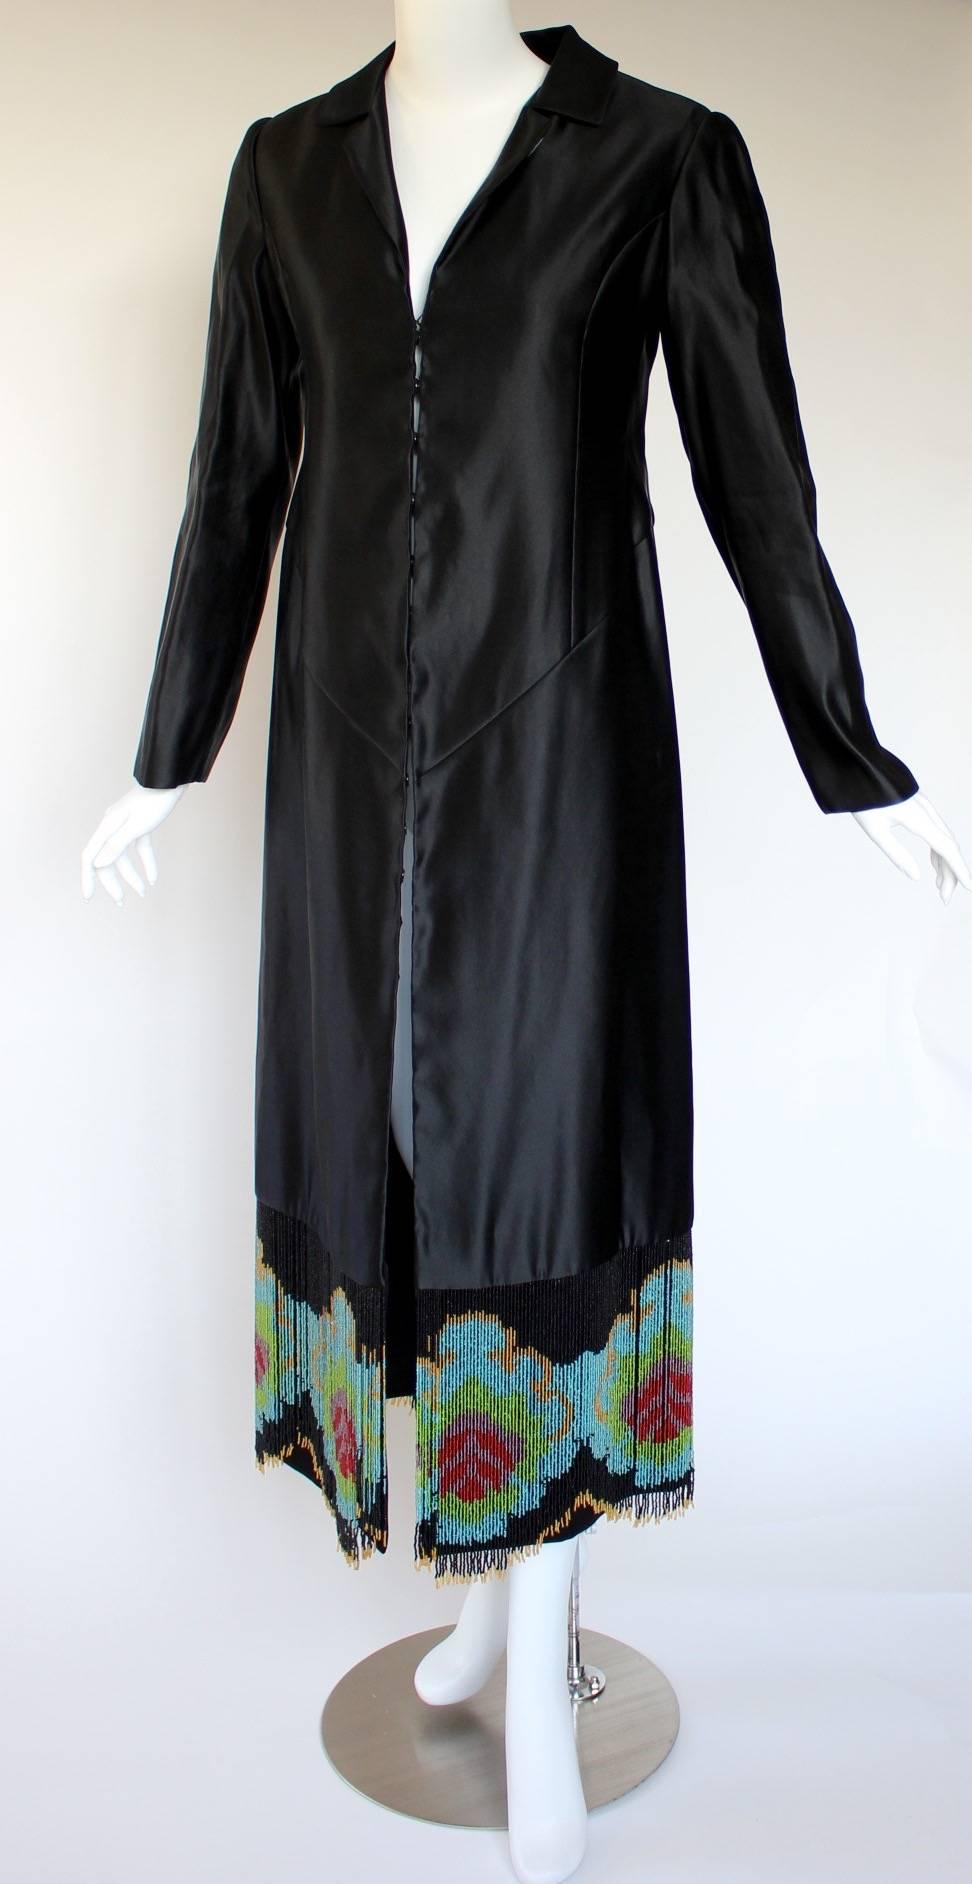 This is a one-of-a-kind piece, custom-made to perfection. Its origins began in Thailand, where the luxurious black silk was tailored into an Art Deco-inspired evening coat, with a notched collar, plunging neckline, seamed bodice, long sleeves and a